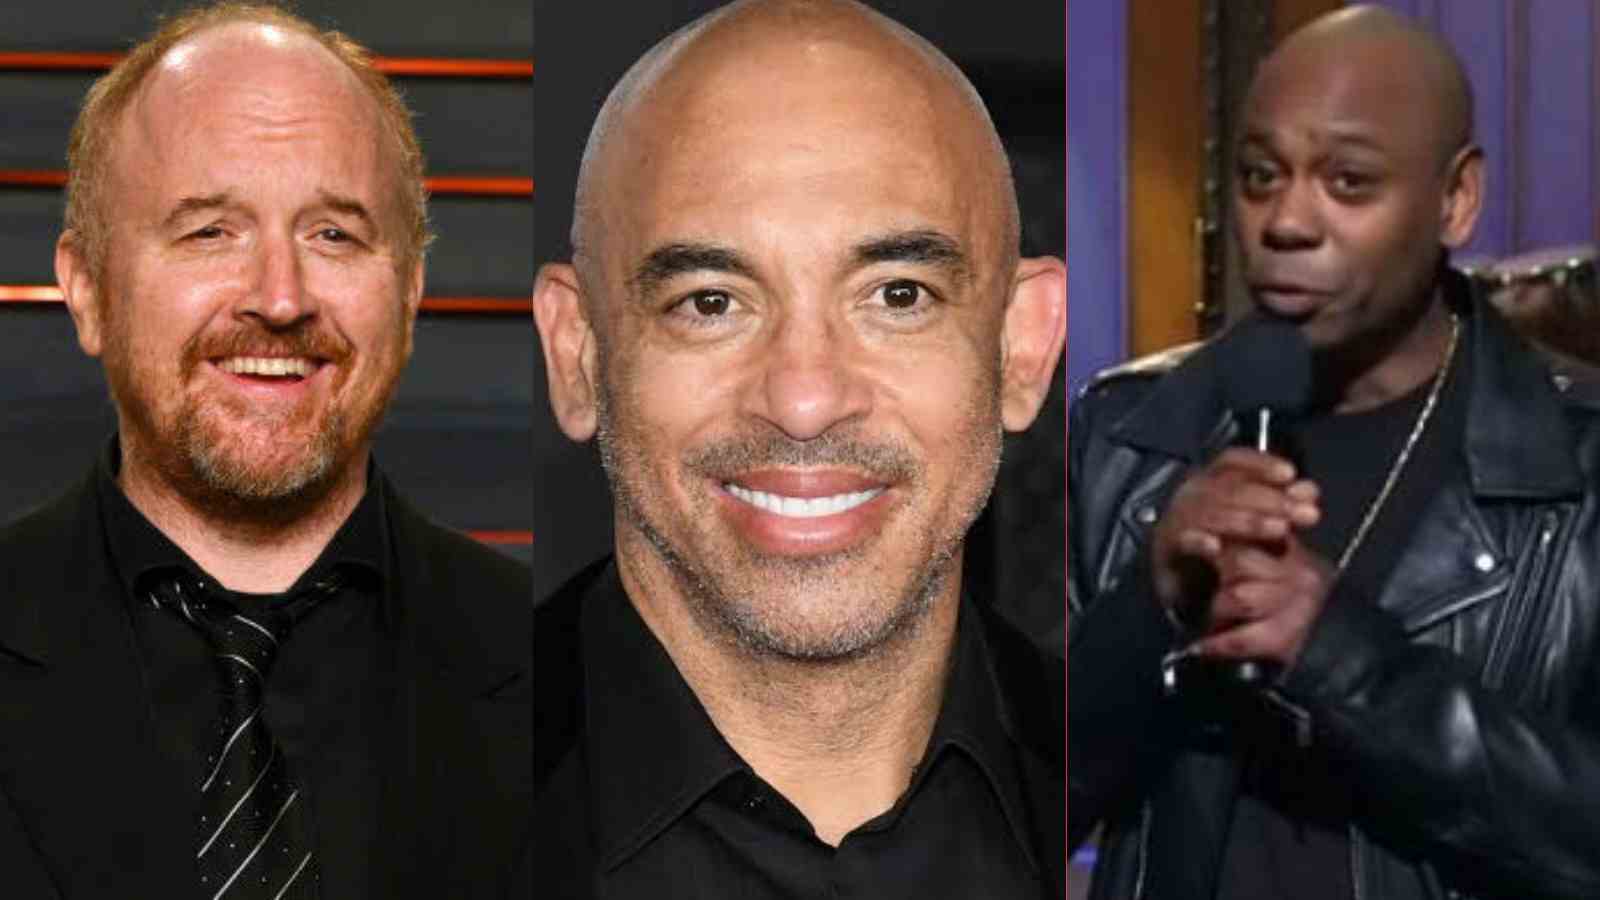 Grammys CEO Harvey Mason jr., is addressing the Dave Chappelle and Louis C.K. nomination